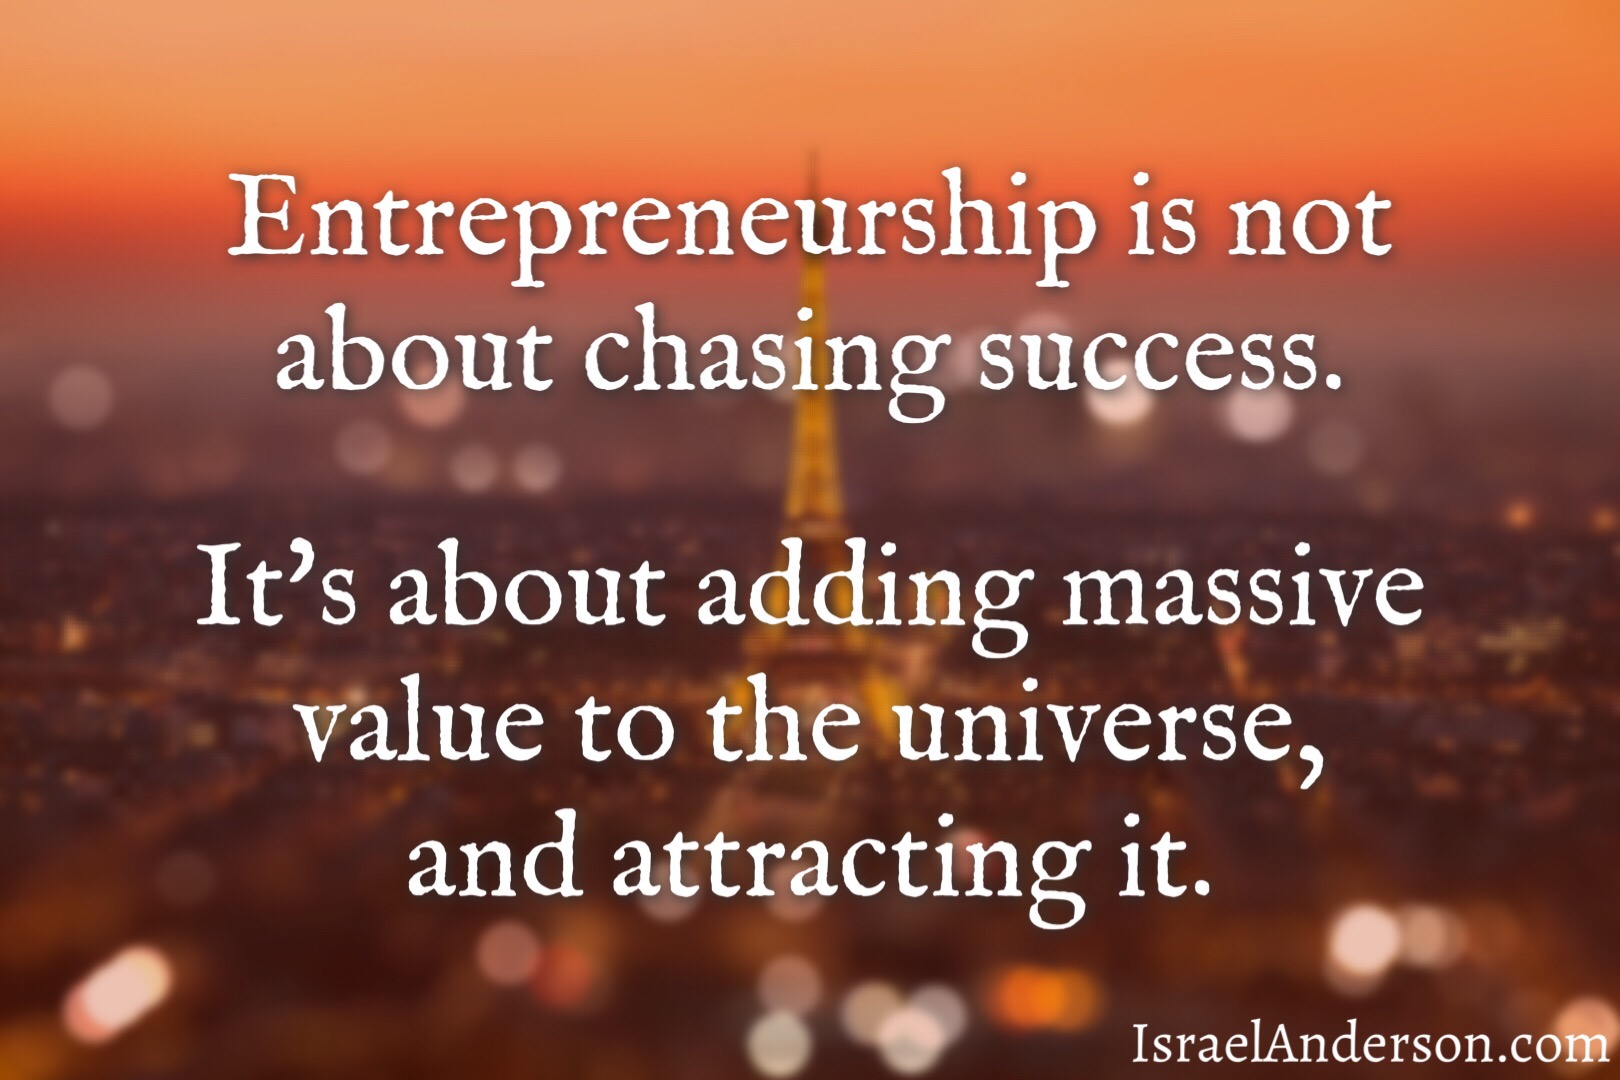 Entrepreneurship is not about chasing success. It's about adding massive value to the universe, and attracting it.